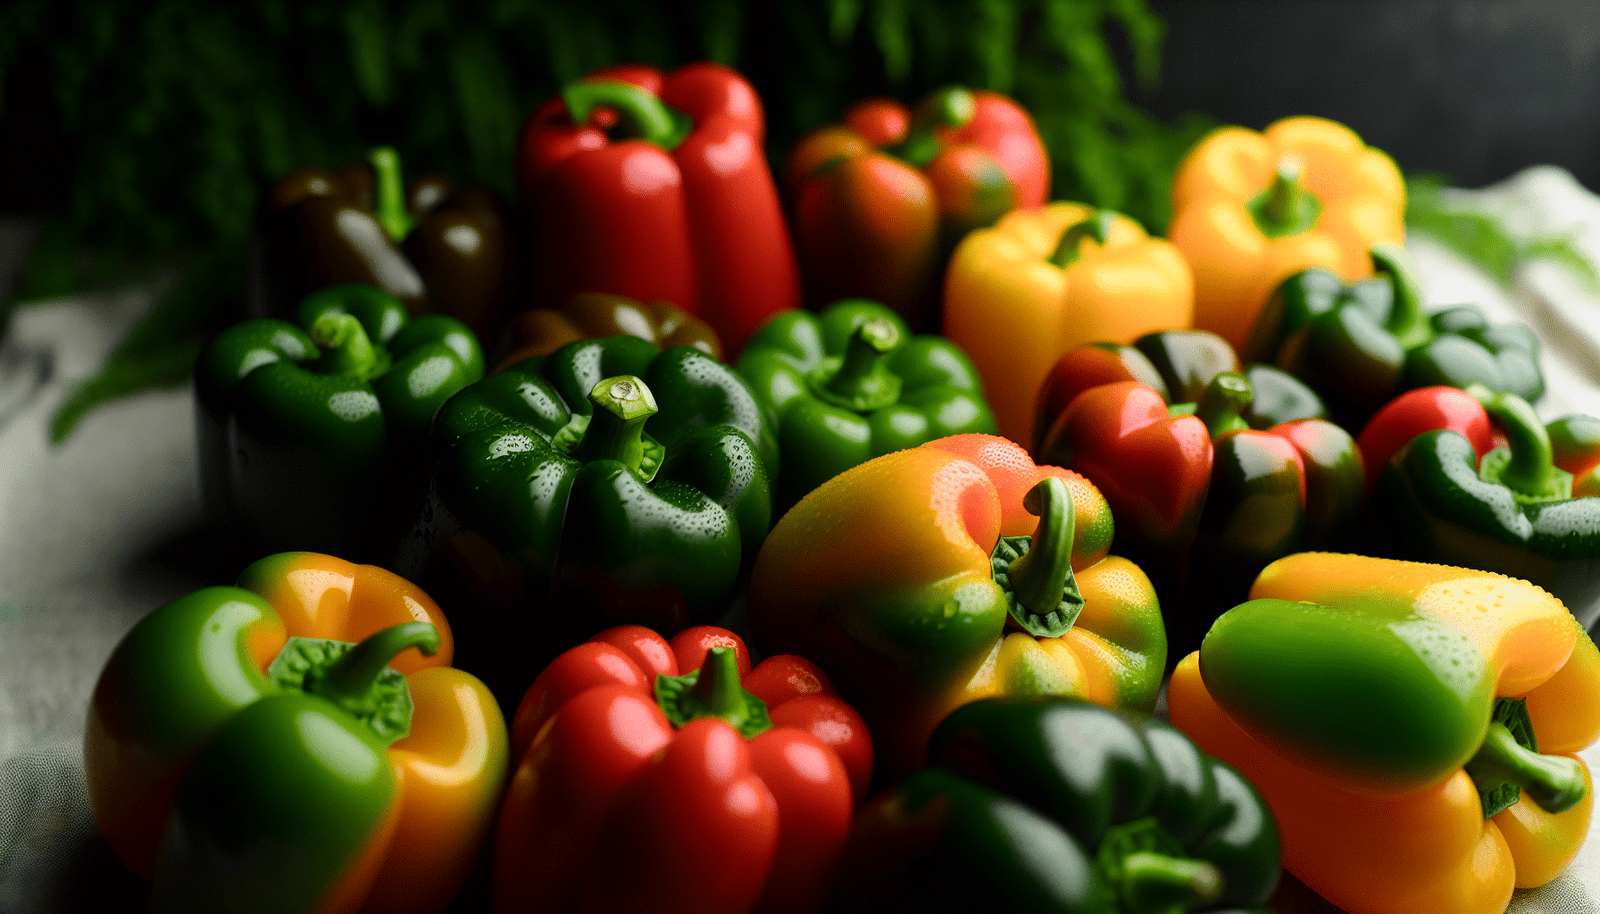 A colorful mix of bell peppers including green, red, yellow, and orange